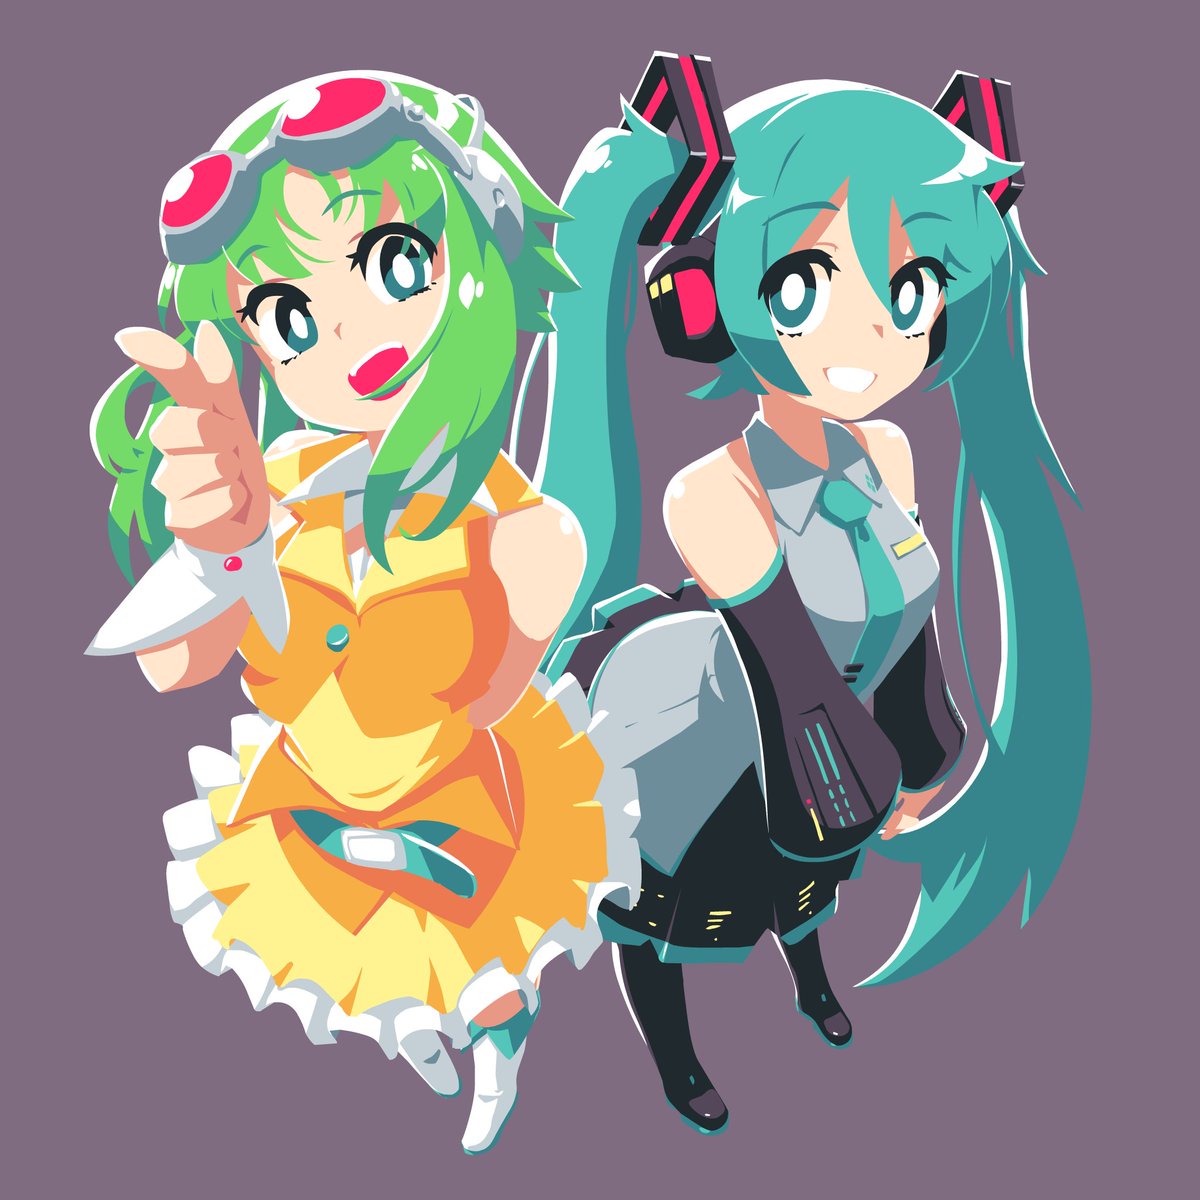 GUMI ,初音ミク 「Happy GUMI day! And a Miku, too, because」|John Suのイラスト